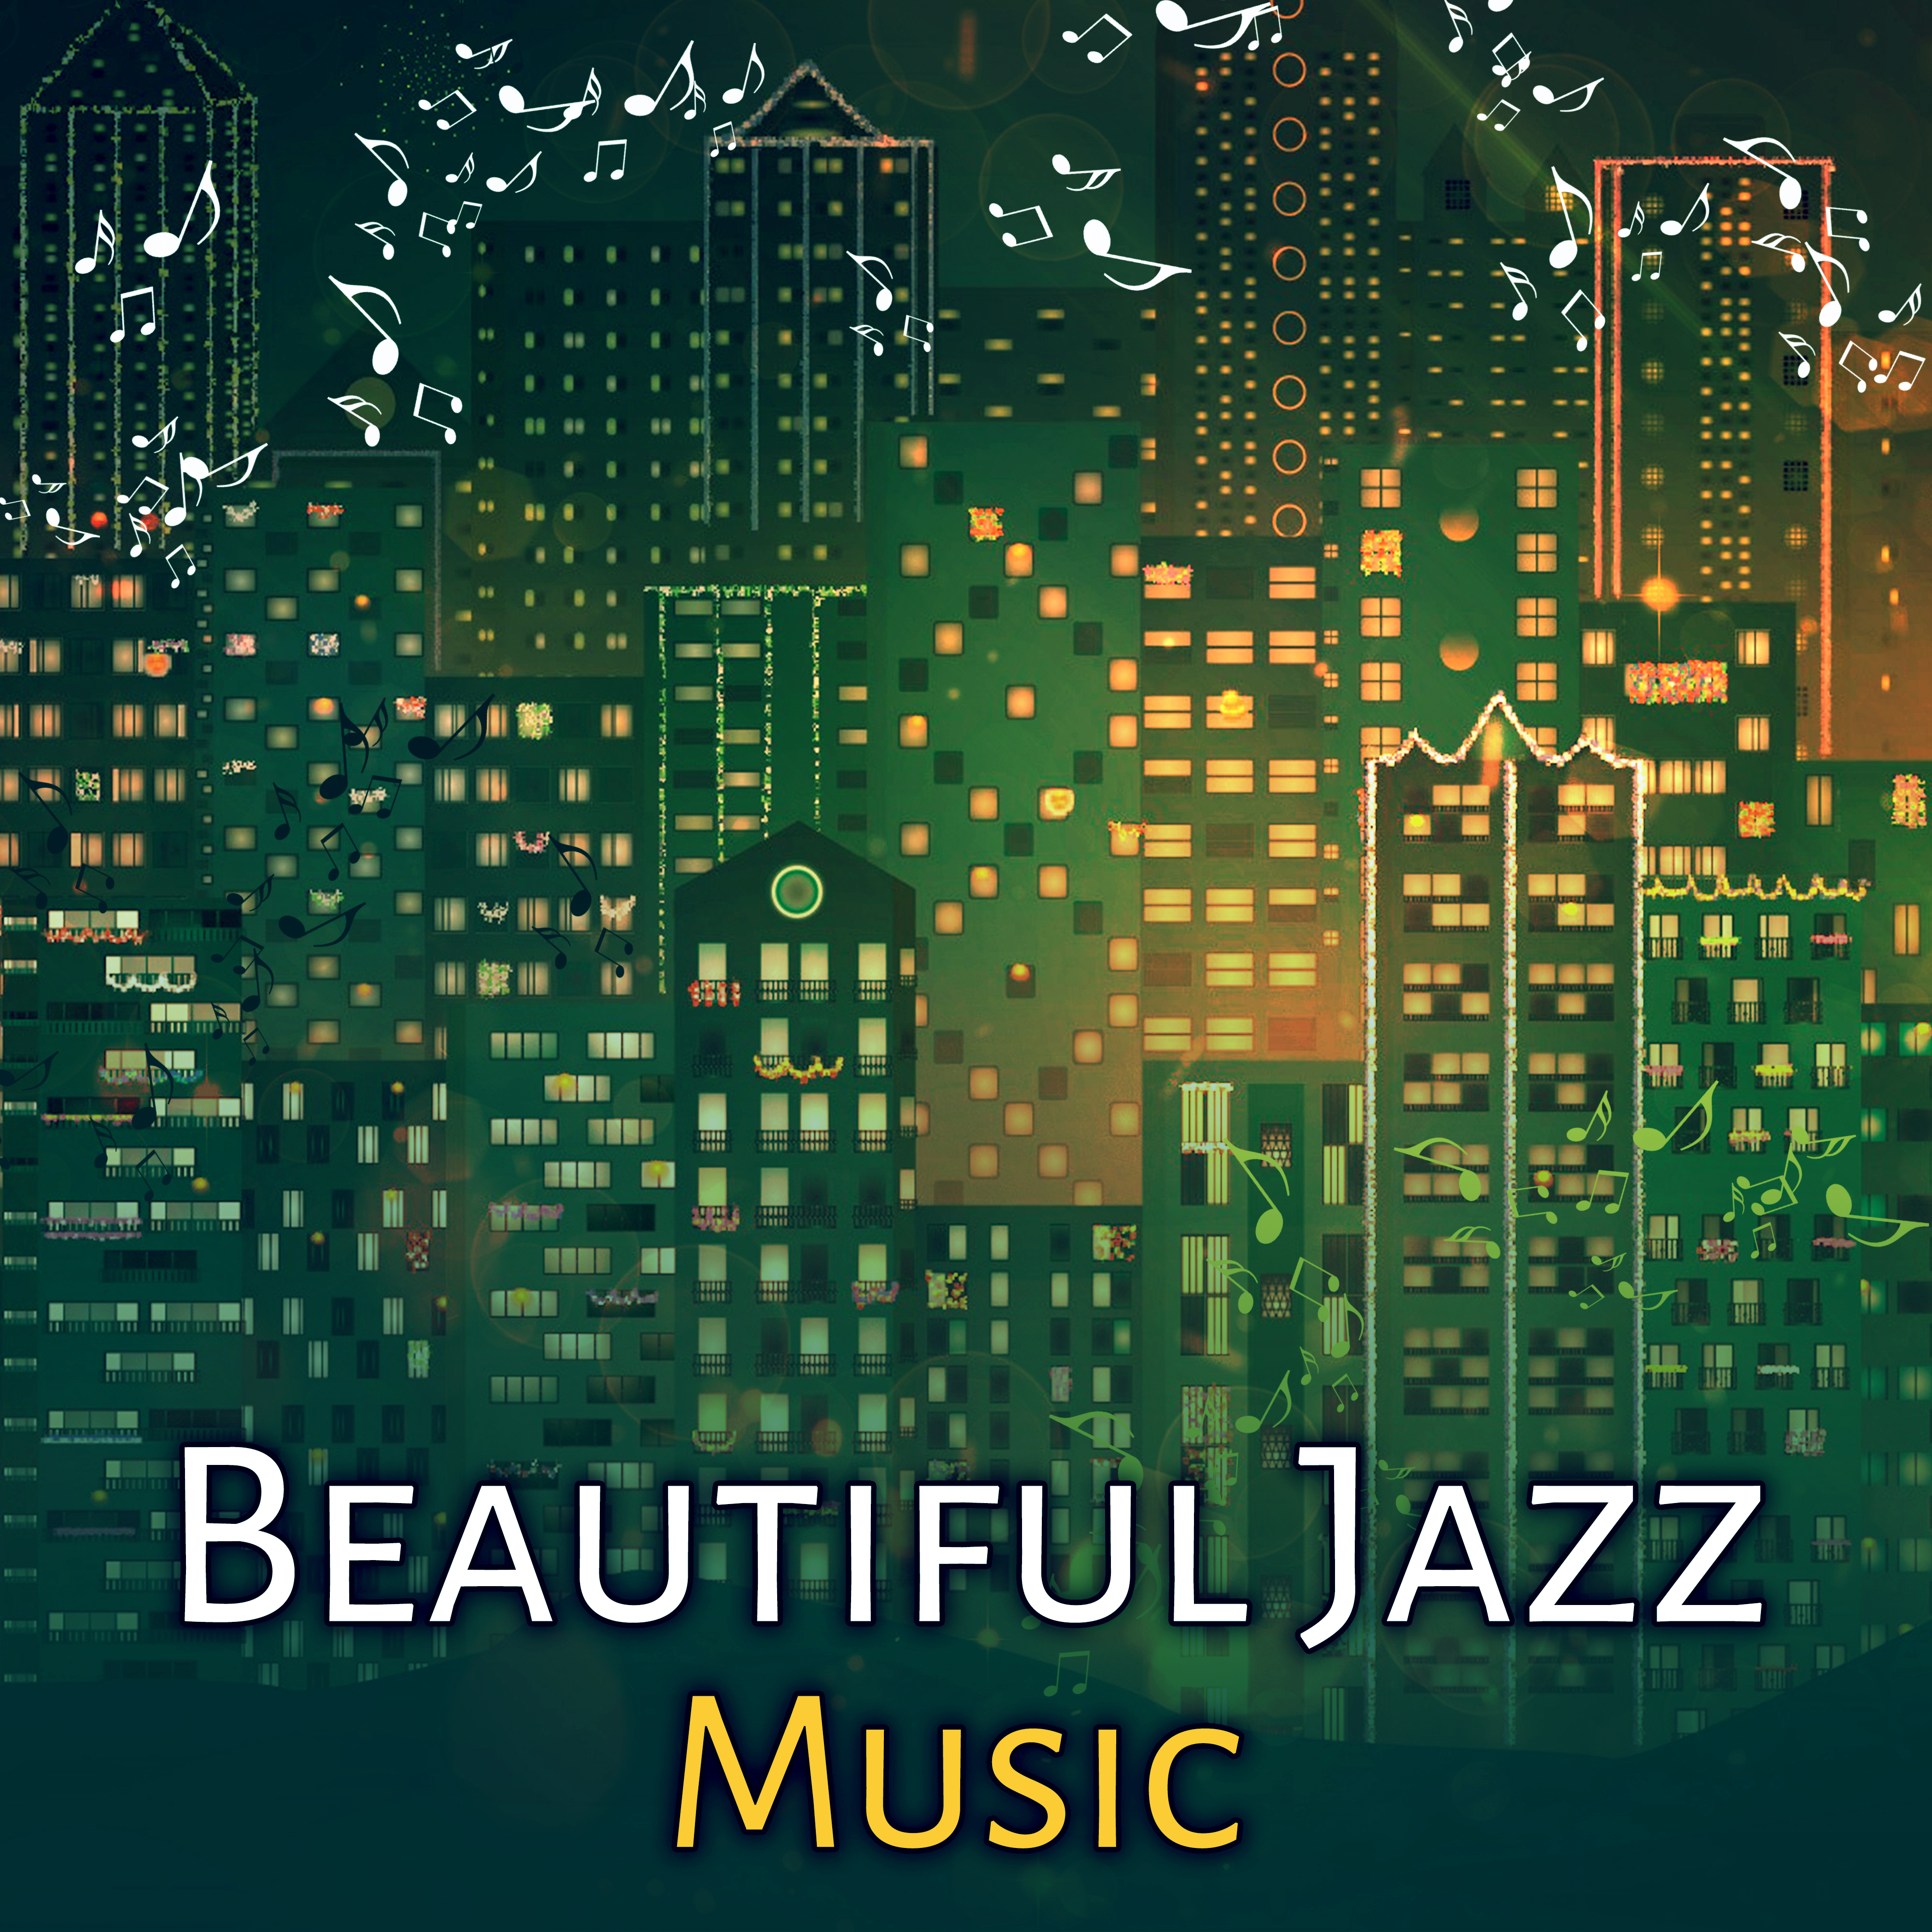 Beautiful Jazz Music – Rest with Smooth Jazz, Easy Way to Relax, Soothing Sounds, Jazz Note